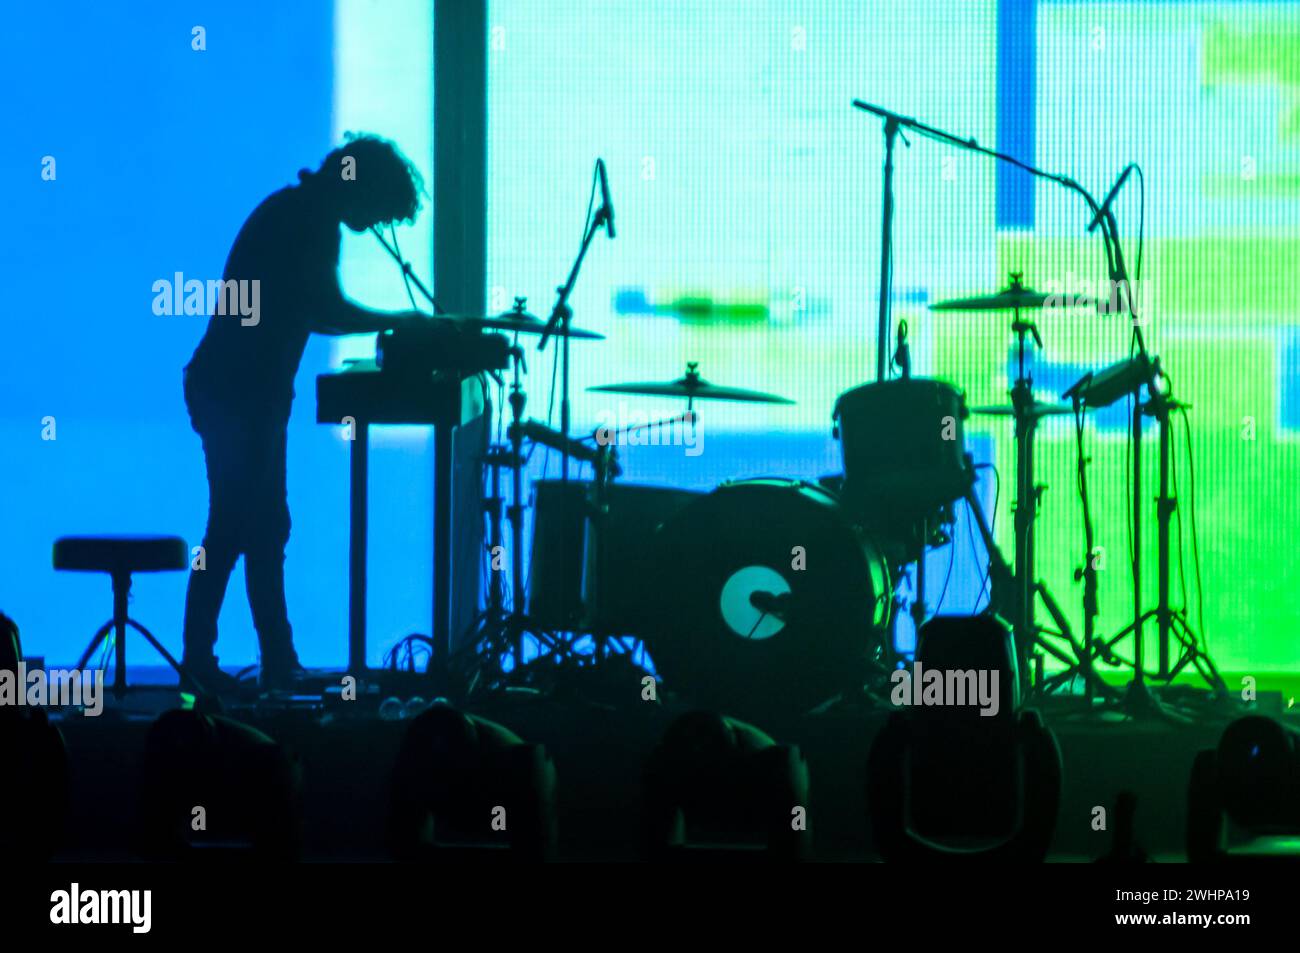 Silhouette of keyboard player on stage during a rock concert Stock Photo